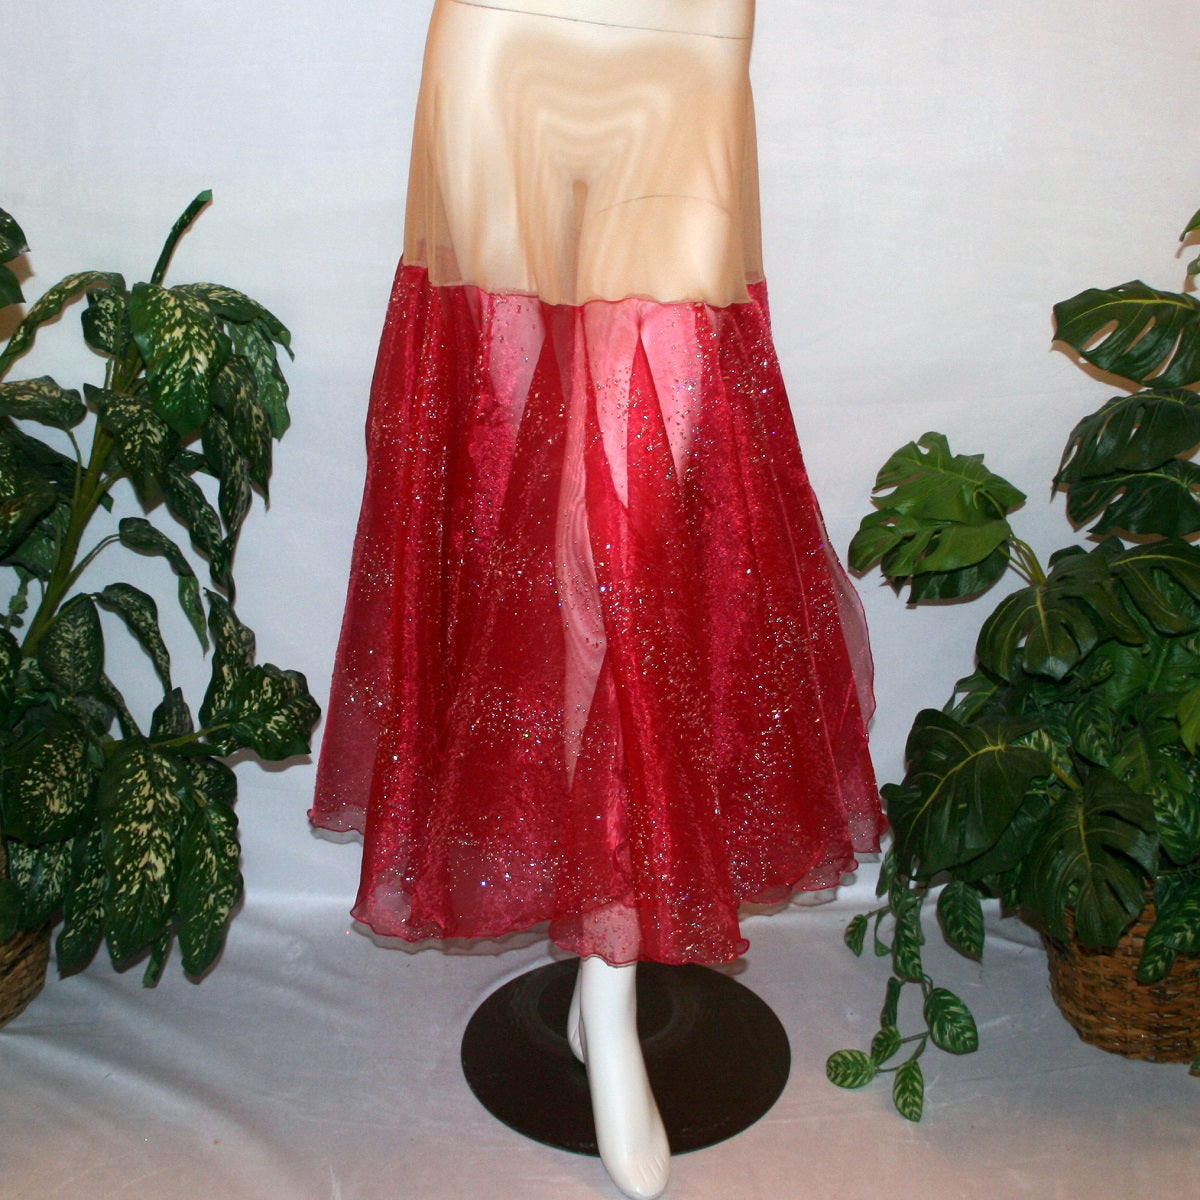 Red ballroom skirt created on a nude illusion hip band of yards of scarlette red panels with silver & pearlized flecking, very cool & showy!